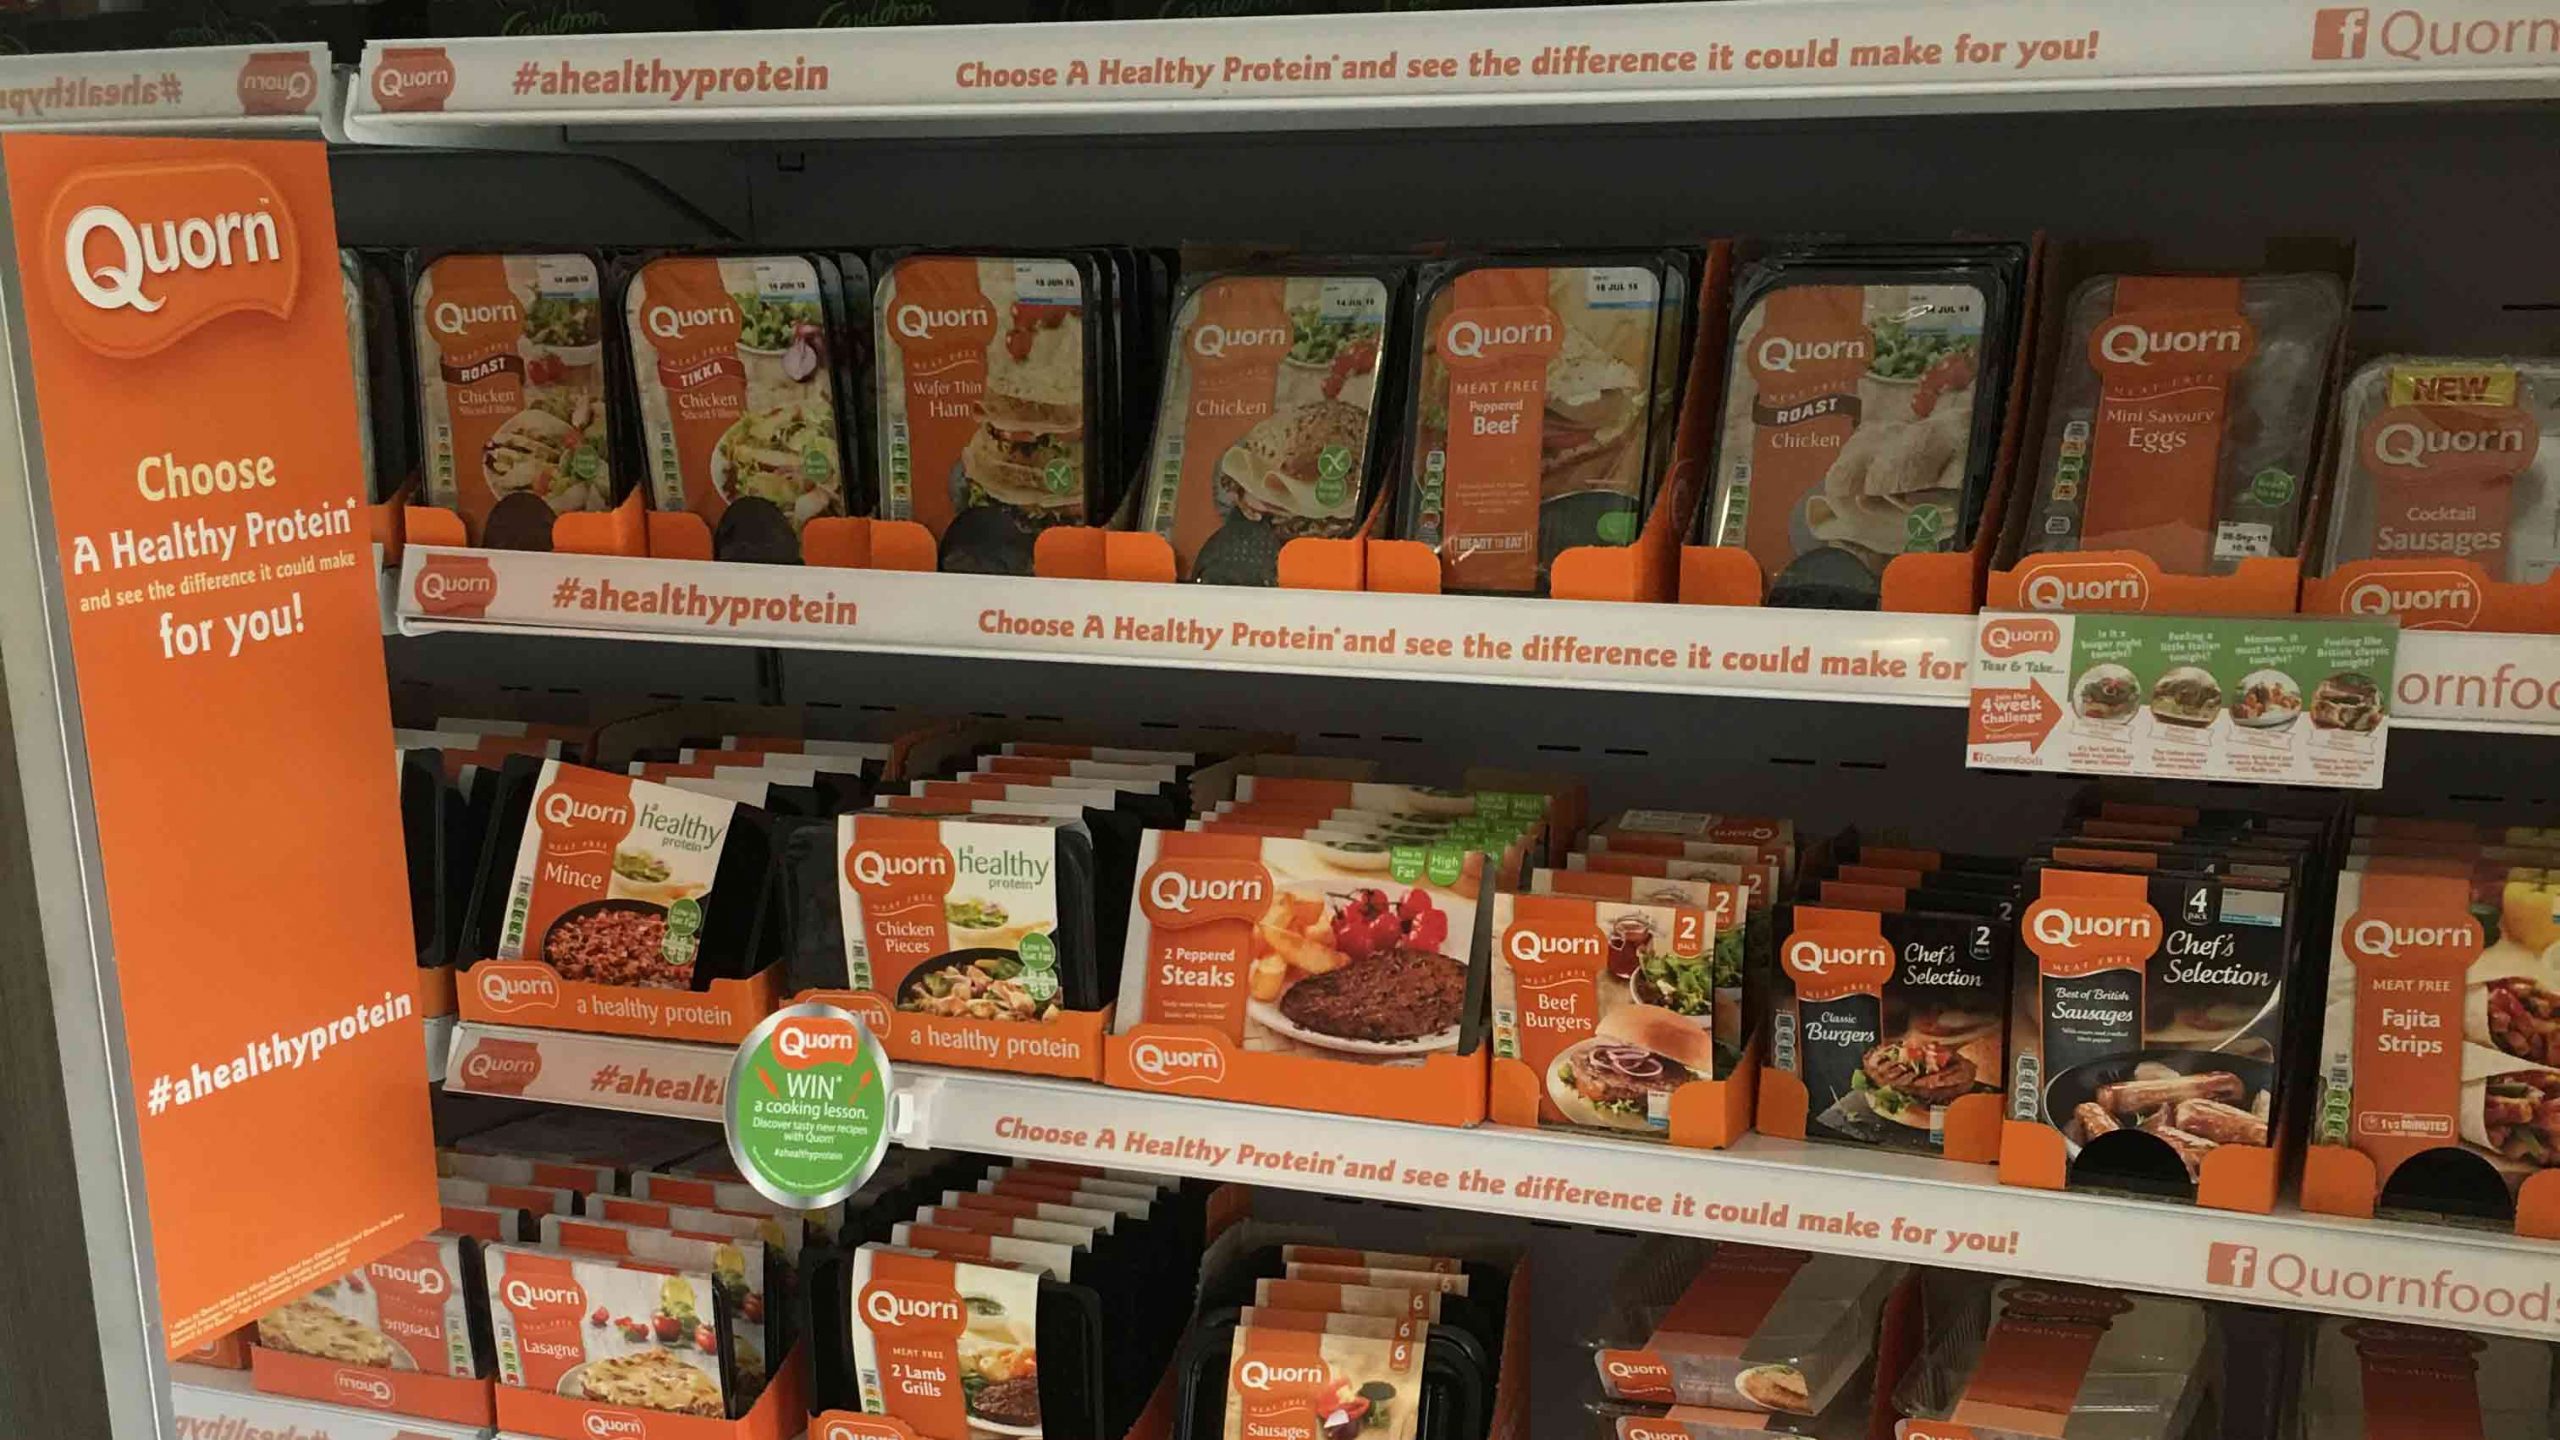 Is Quorn sustainable? A shelf full of Quorn products.